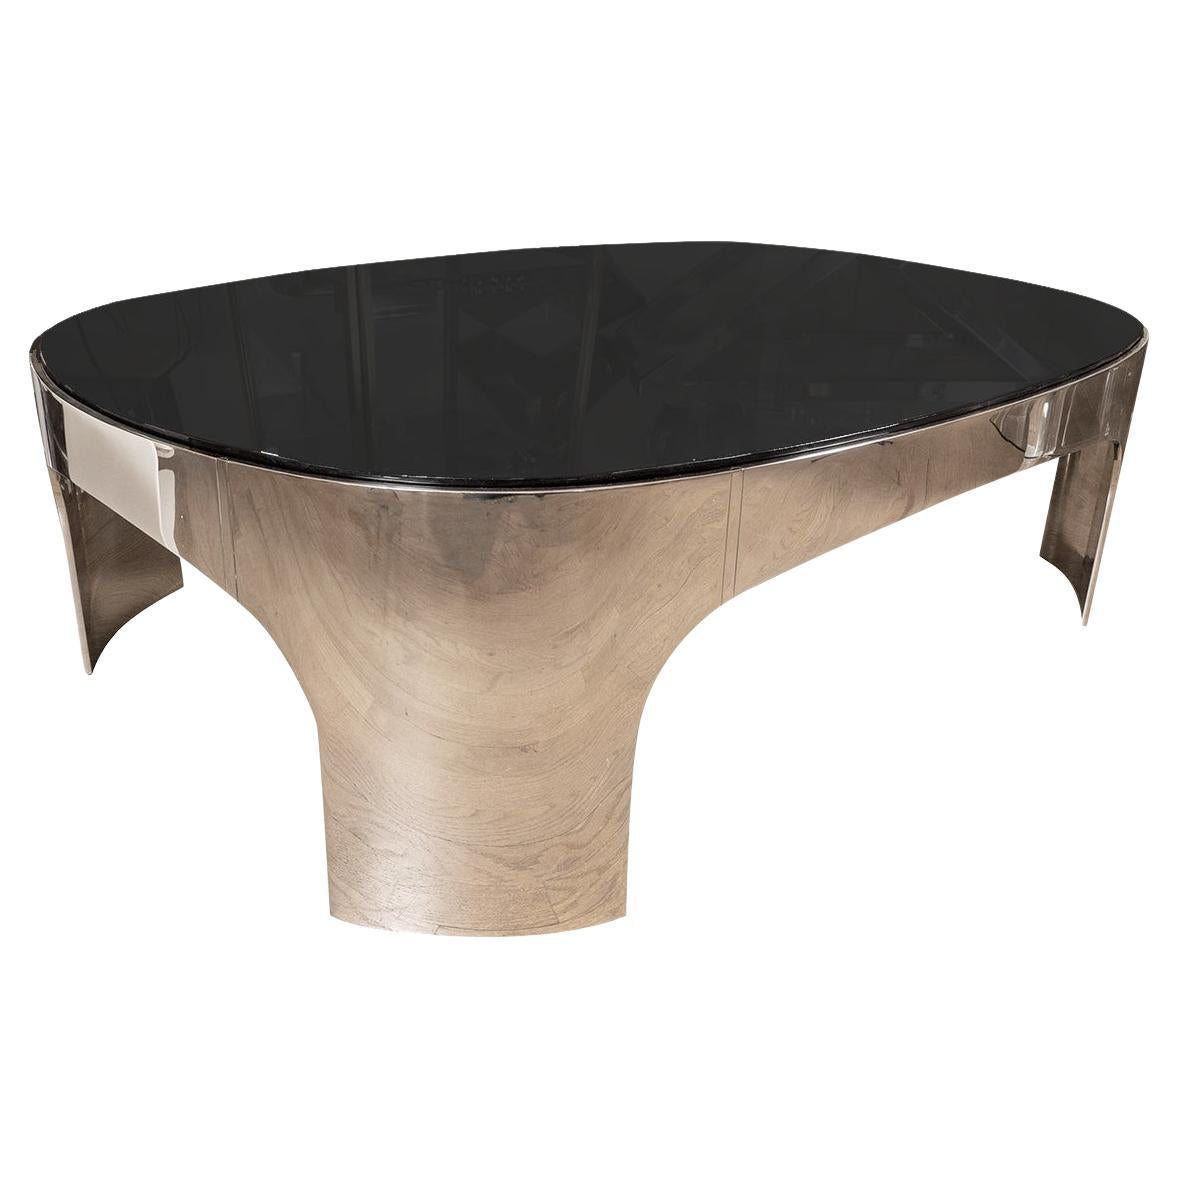 Oval polished stainless steel black glass coffee table